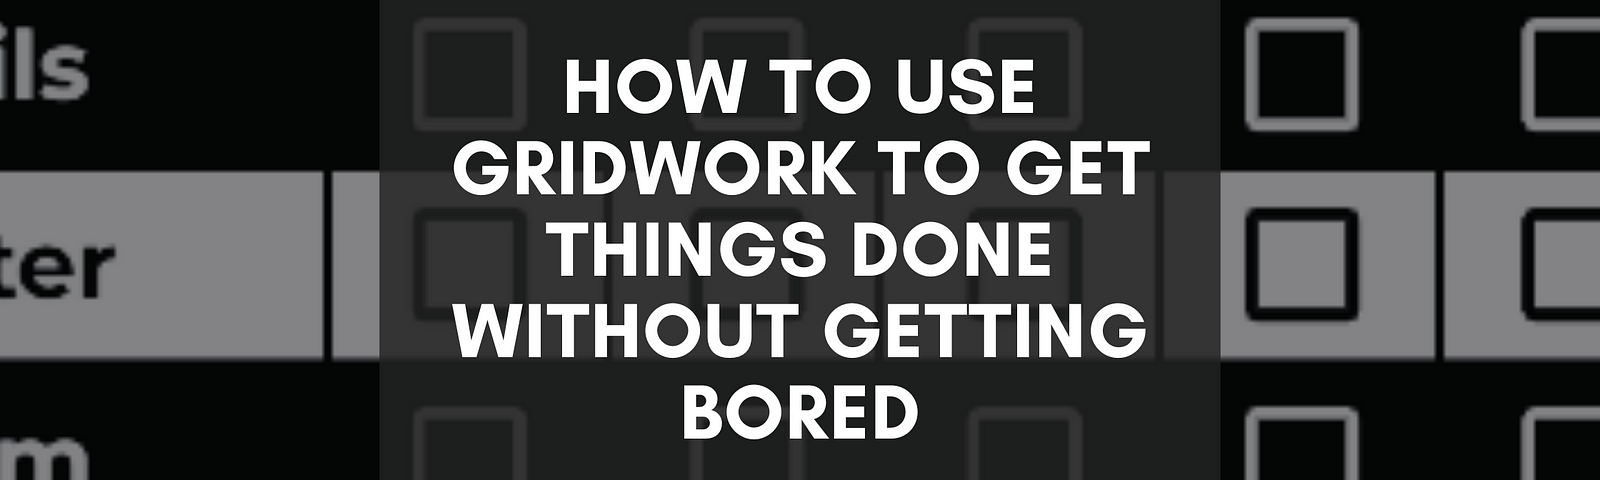 How to Use Gridwork to Get Things Done Without Getting Bored